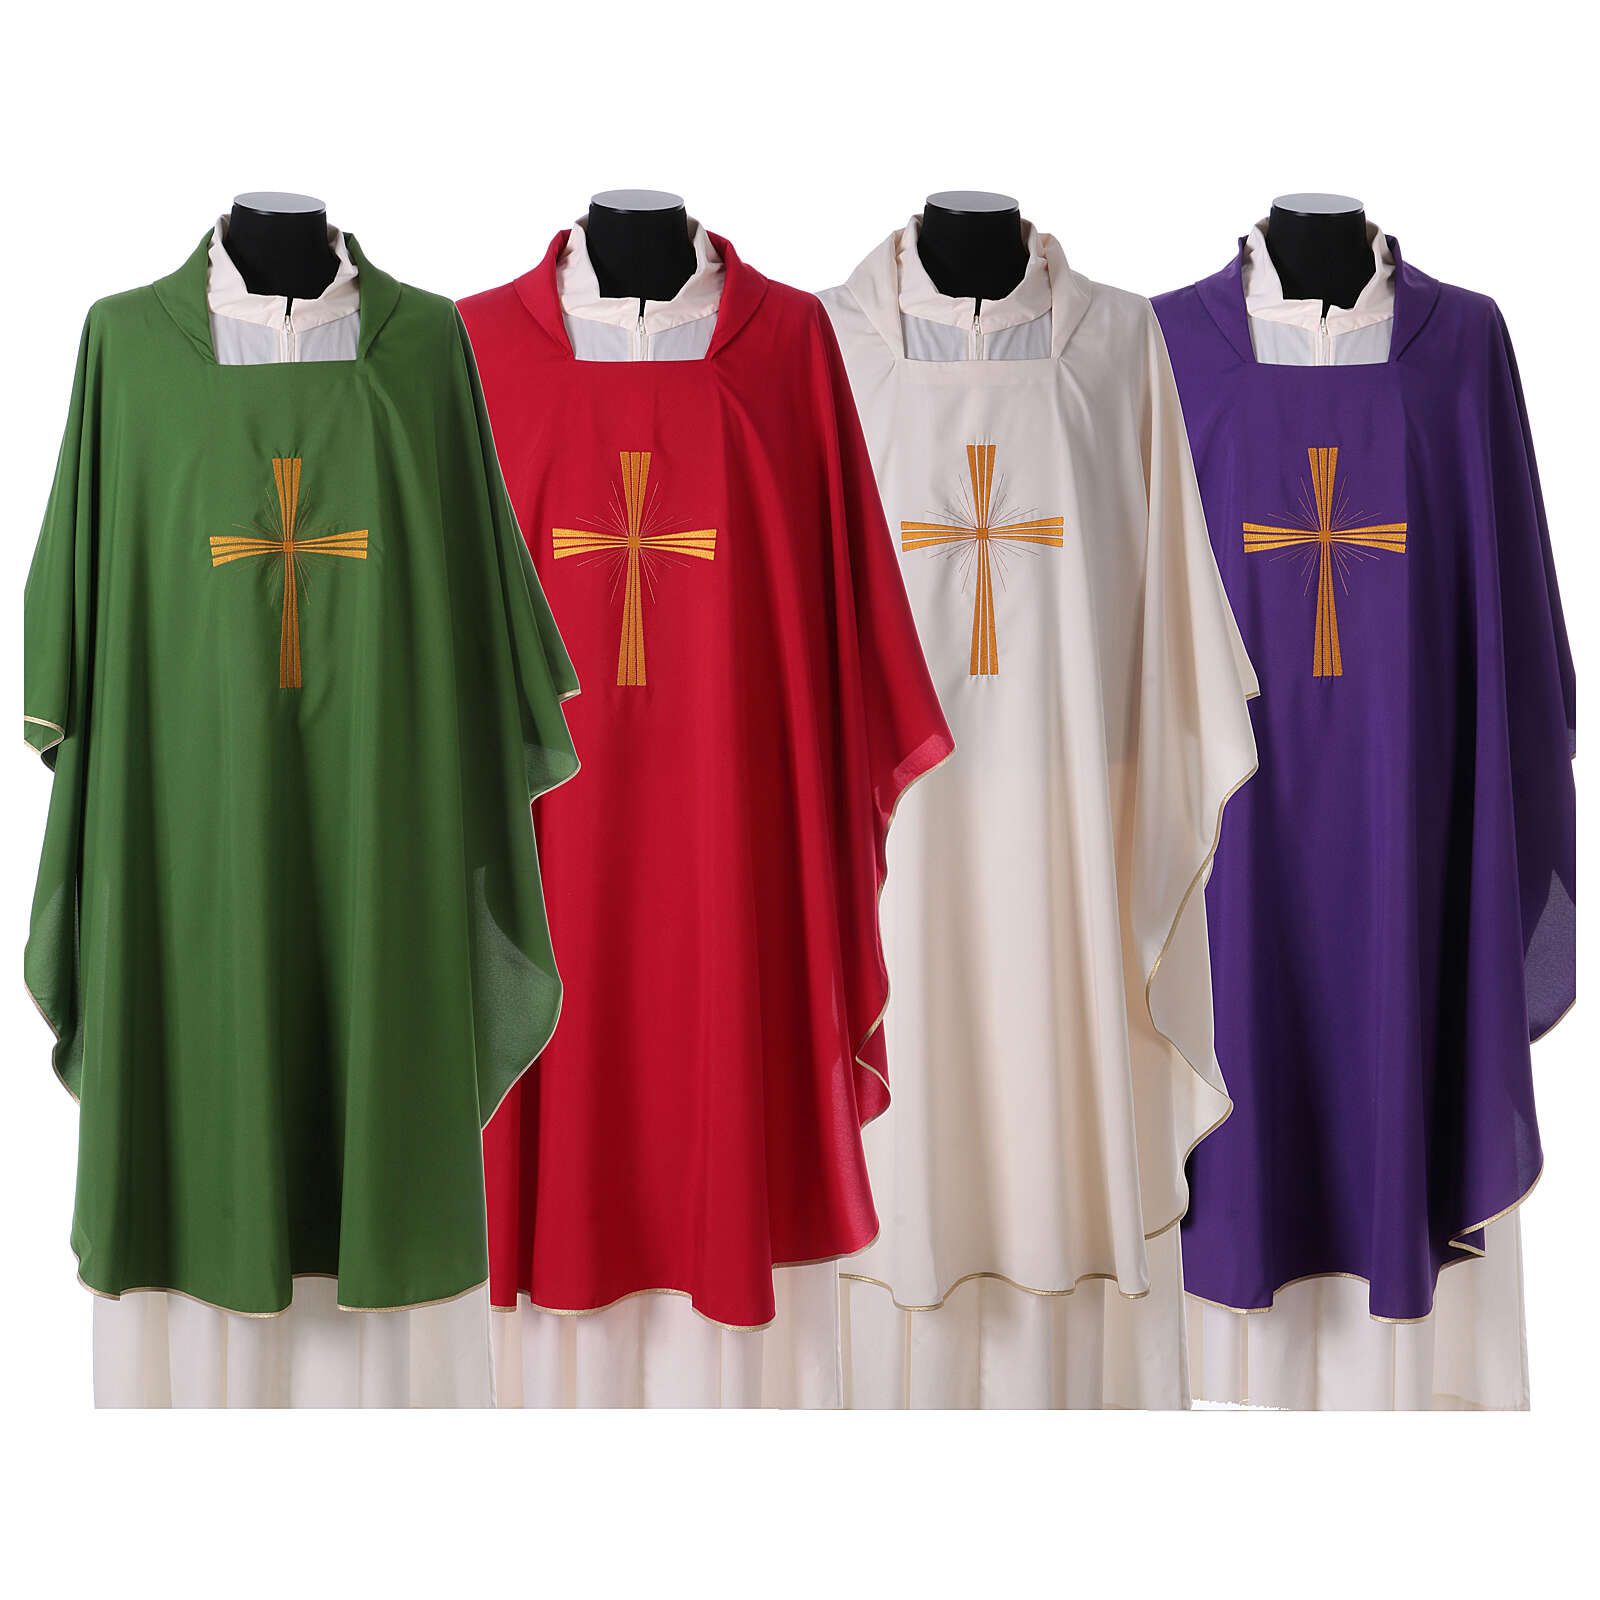 Chasuble with cross machine embroidery done with polyester thread 